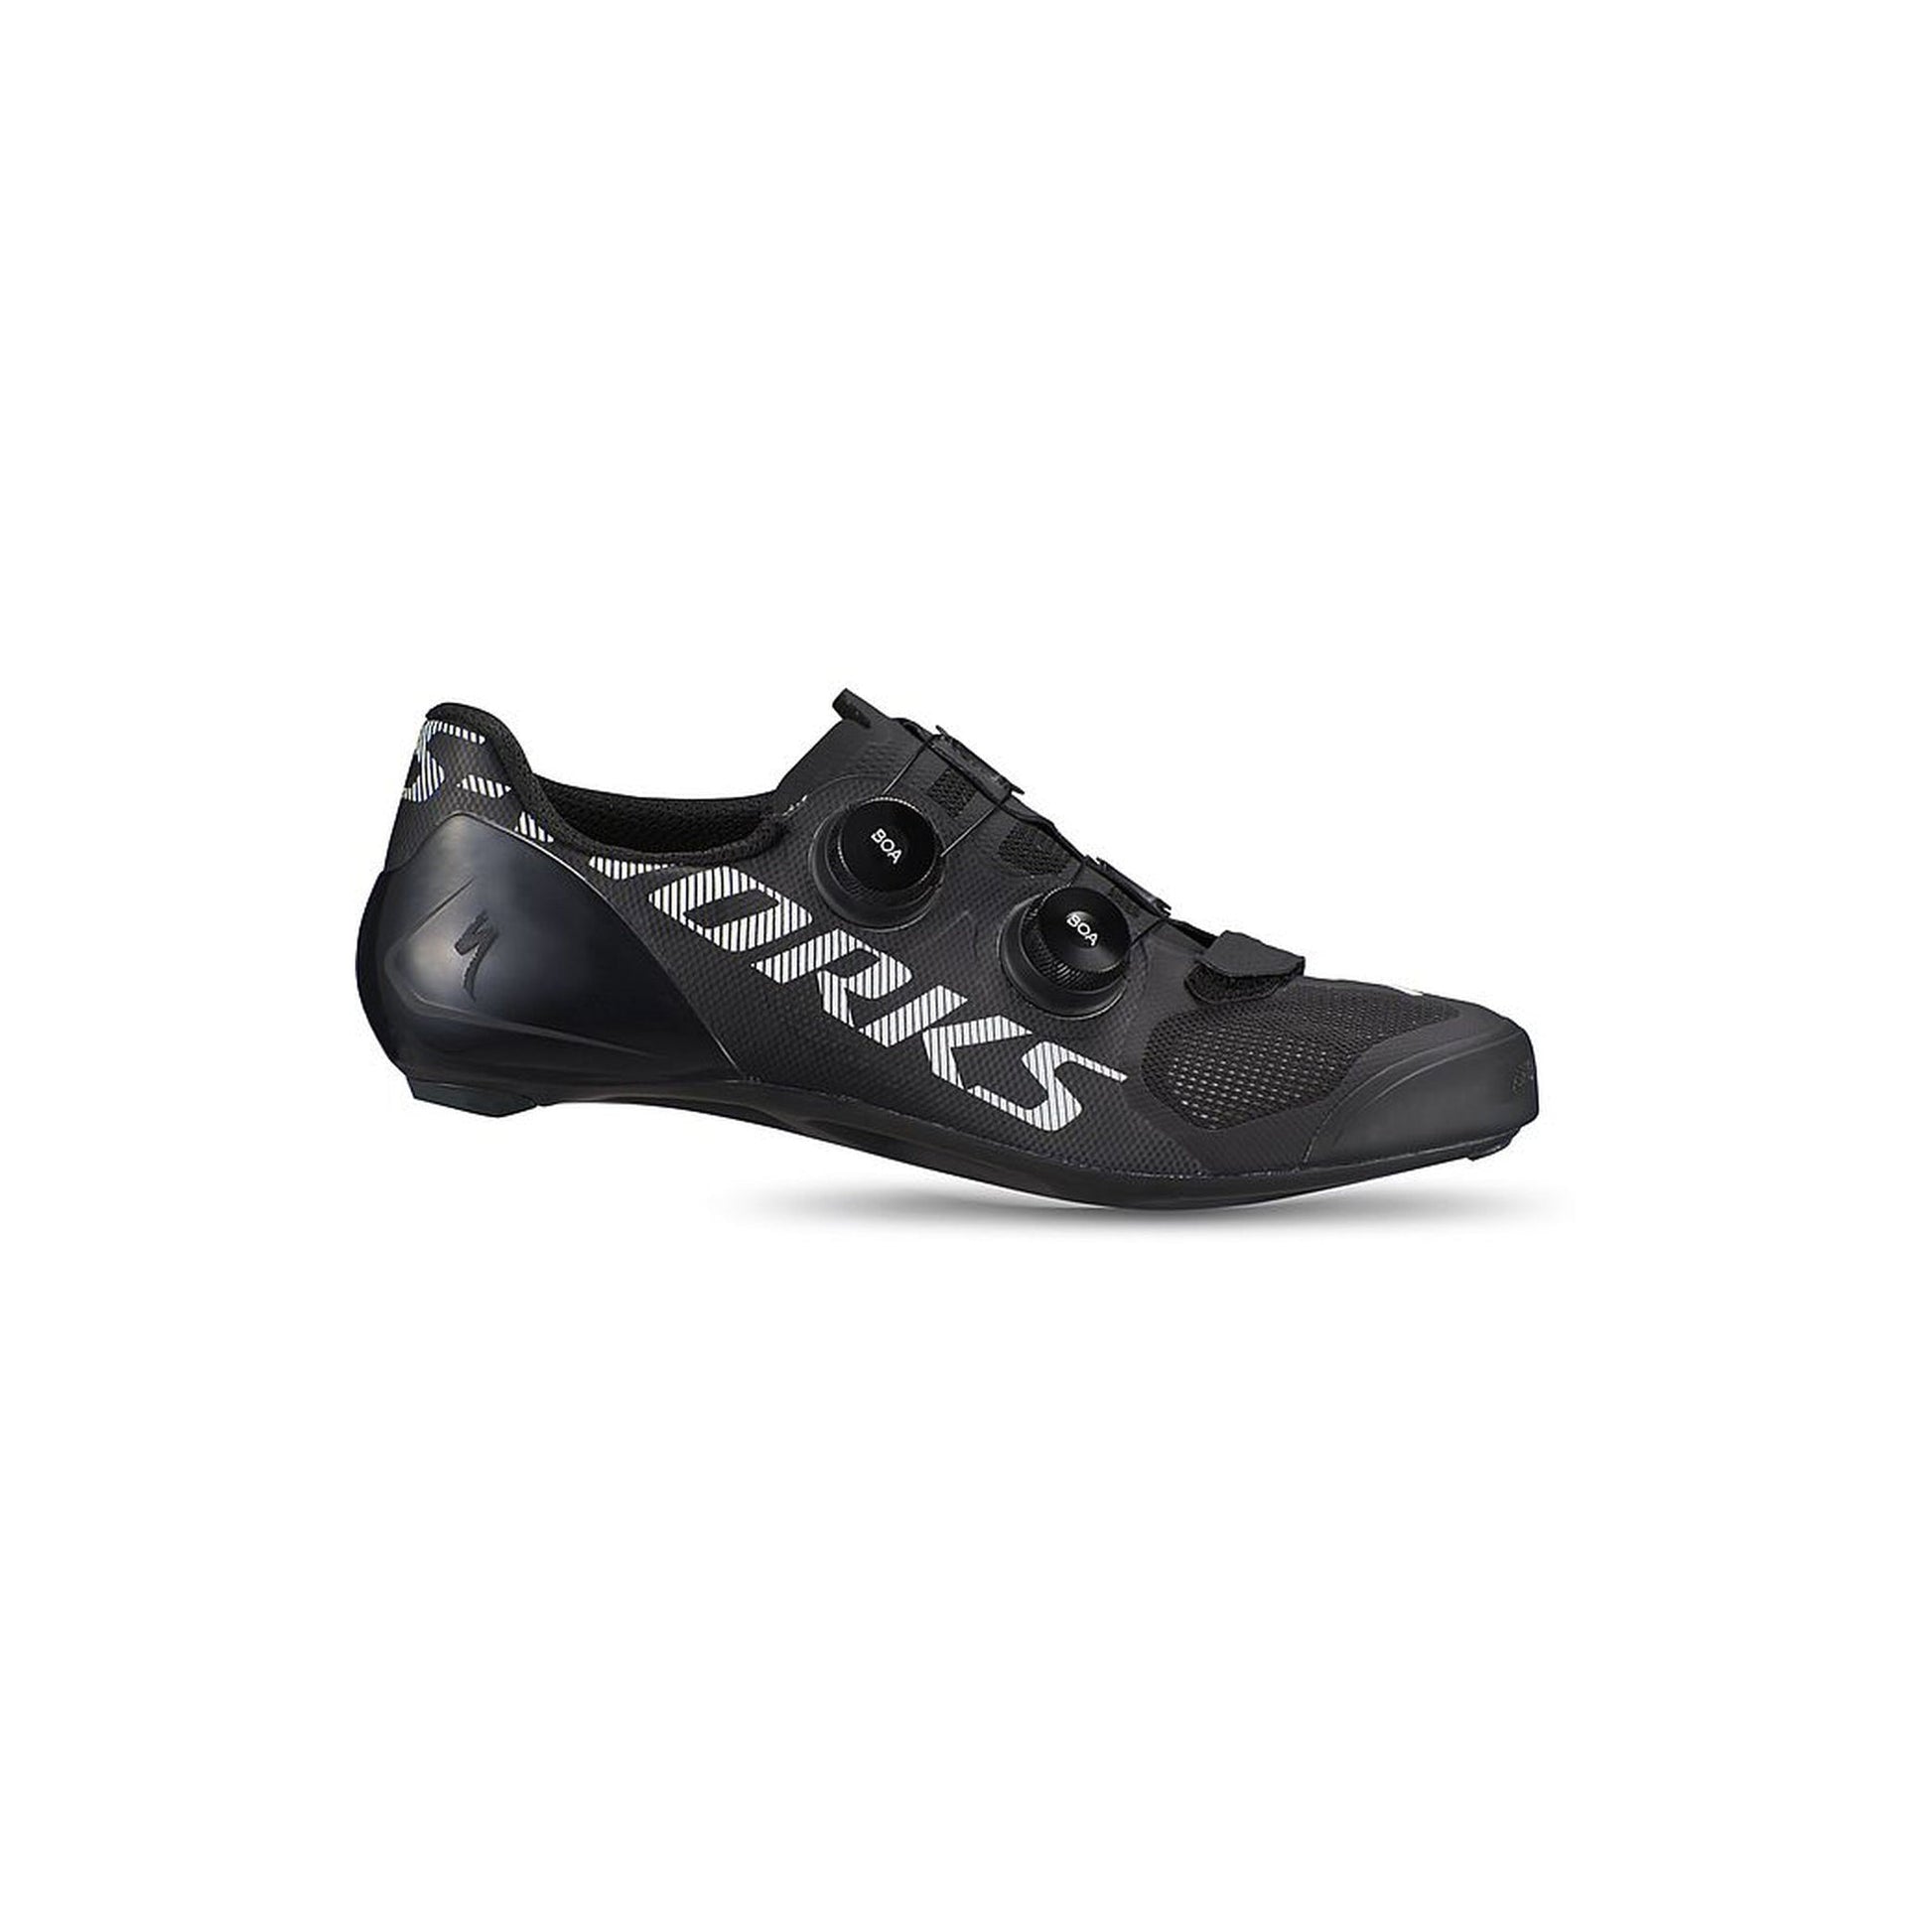 S-Works Vent Road Shoes-Cycles Direct Specialized